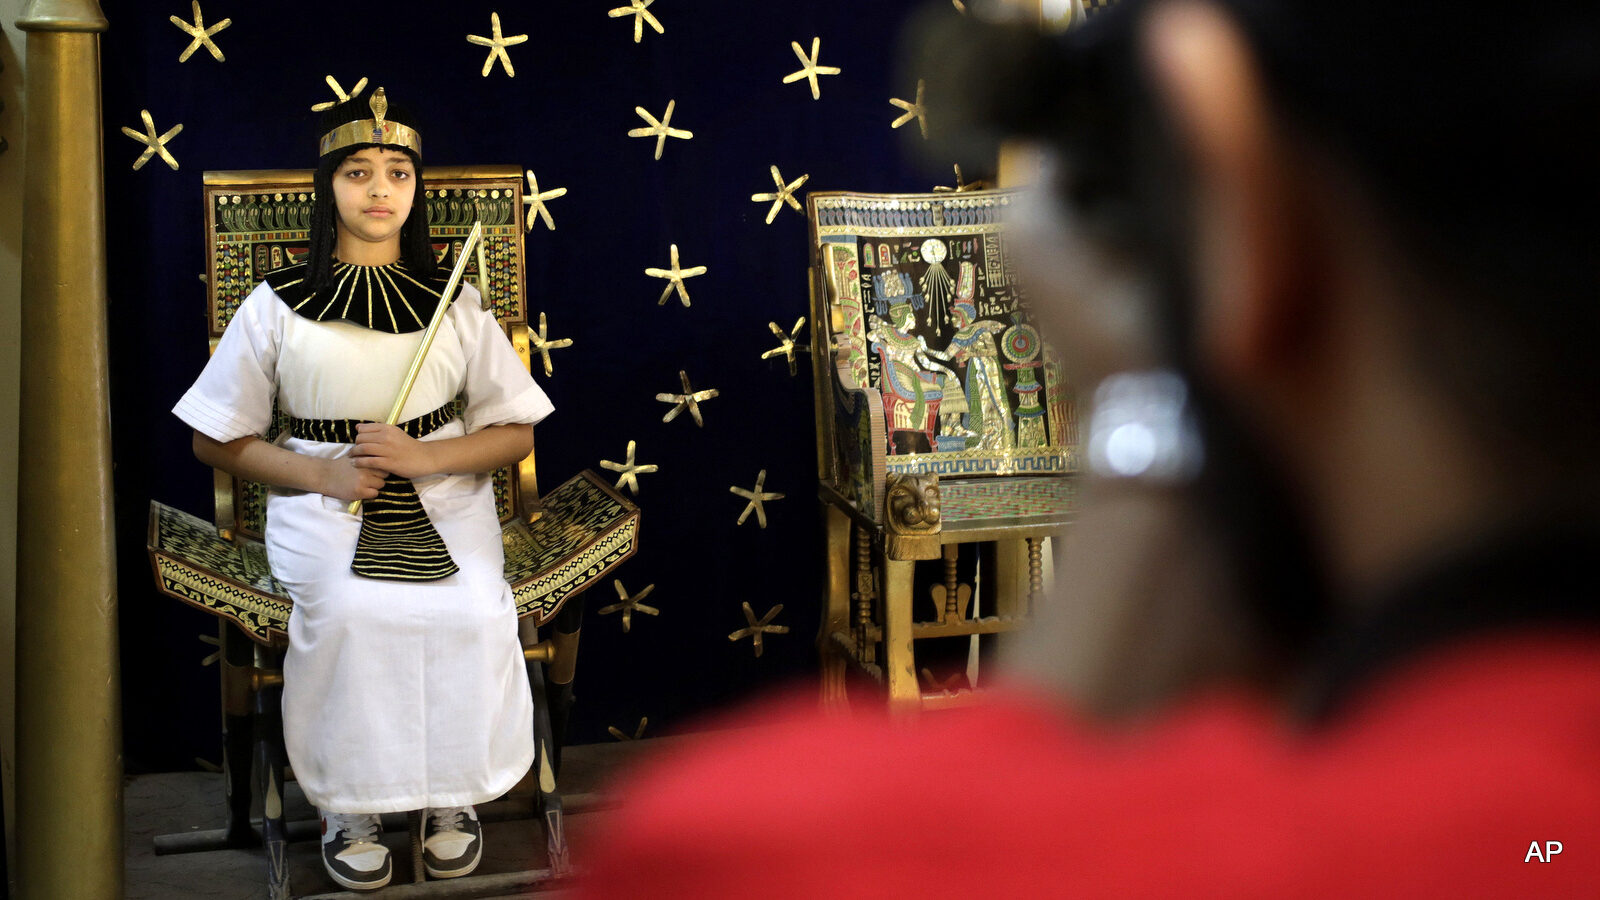 Nour Mahmoud, 12, wearing a Pharaonic costume poses for a photograph at the studio of the Pharaonic Village, during Sham el-Nessim, or “smelling the breeze,” in Giza, Egypt, Monday, April 13, 2015. The holiday signifies the arrival of Spring, a uniquely Egyptian tradition practiced since the days of the Pharaohs.